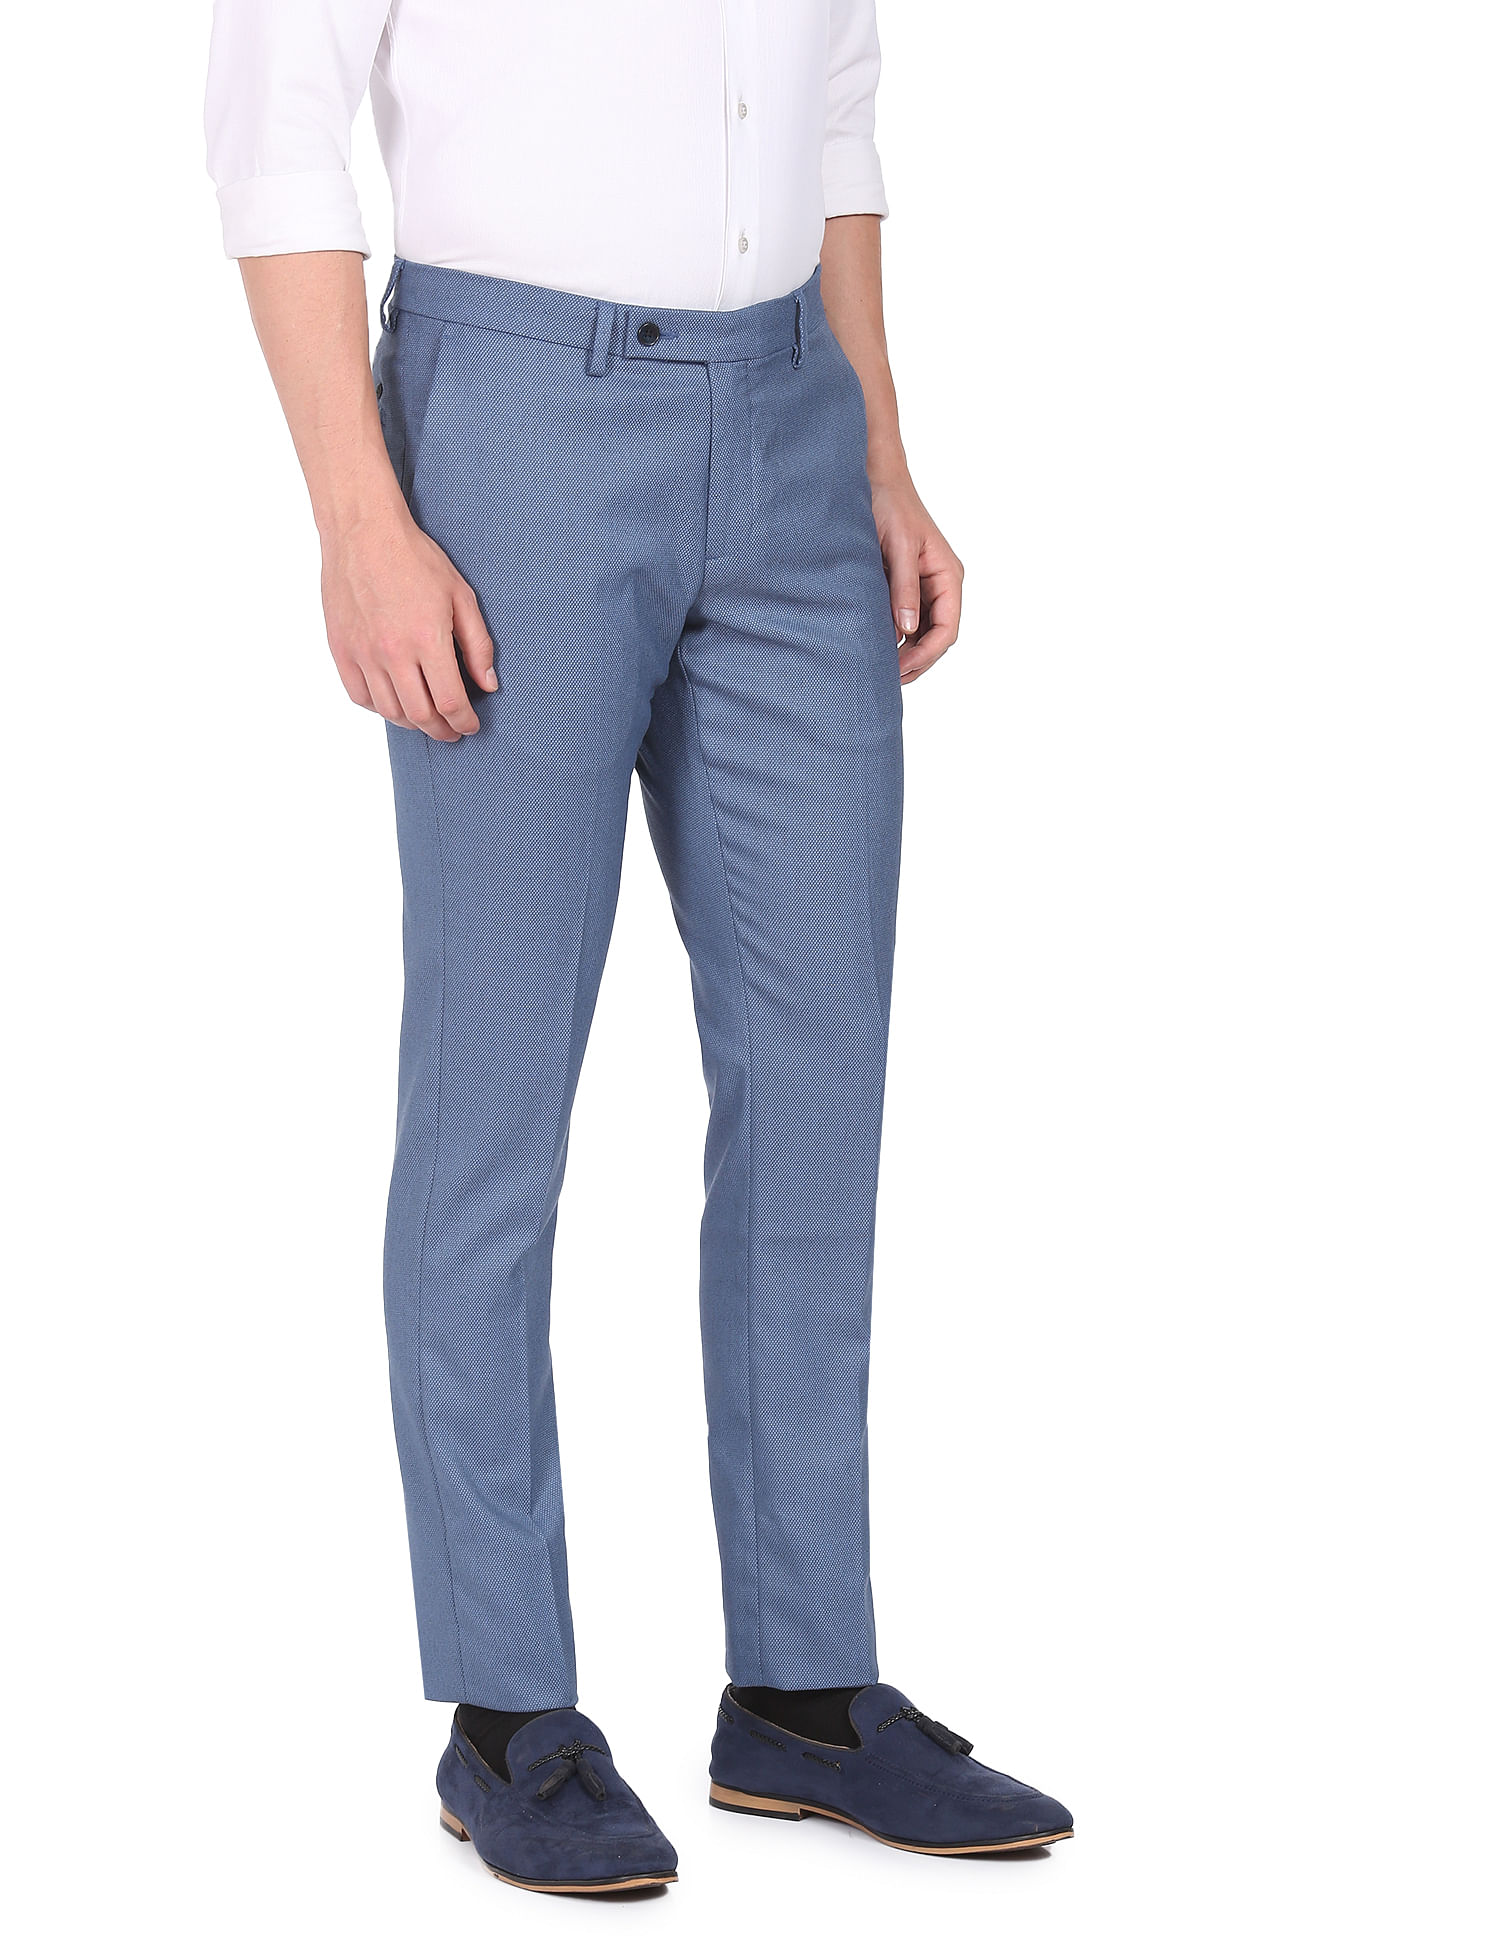 Best Formal Trousers To Get Decent Look with These Stylish Designs